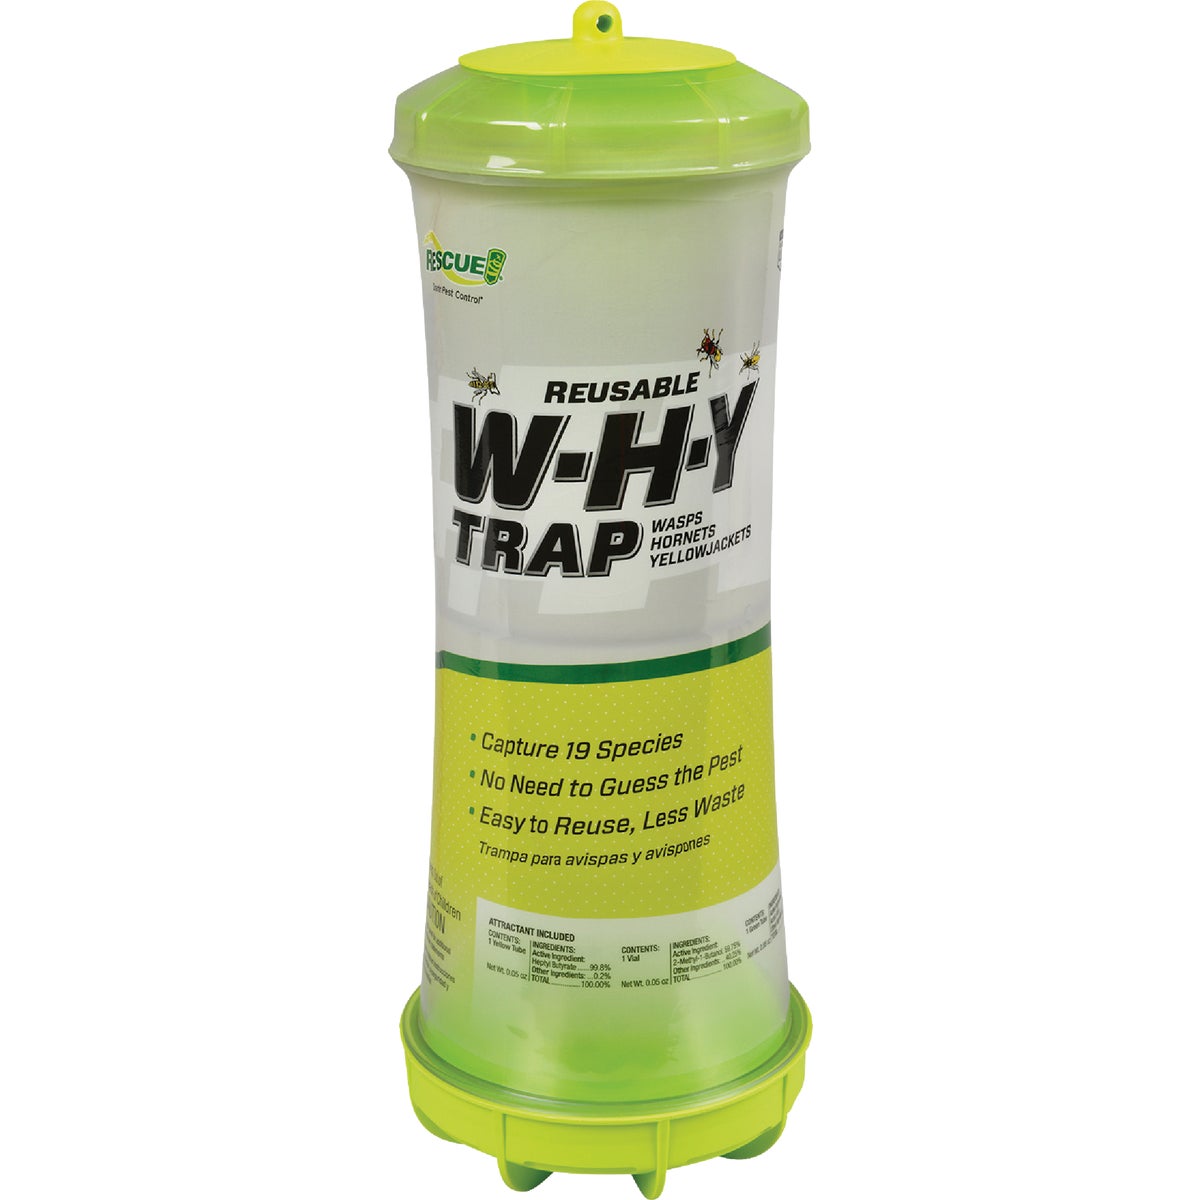 Item 758789, Trap is reusable and catches 18 different species of wasps, hornets, and 